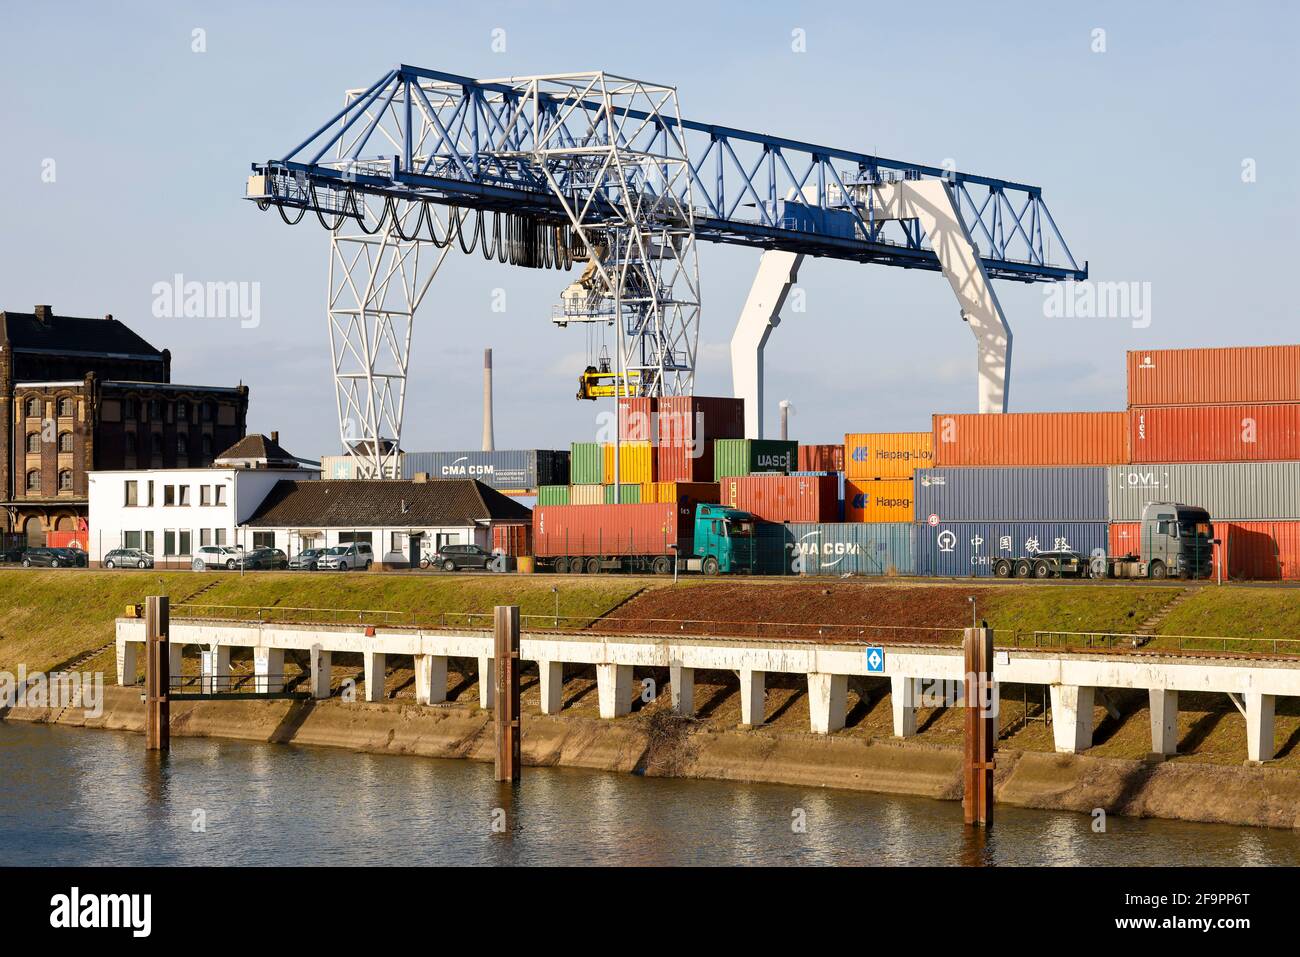 23.02.2021, Krefeld, North Rhine-Westphalia, Germany - The Rhine port Krefeld is the fourth largest port in NRW, container handling at the KCT Krefeld Stock Photo